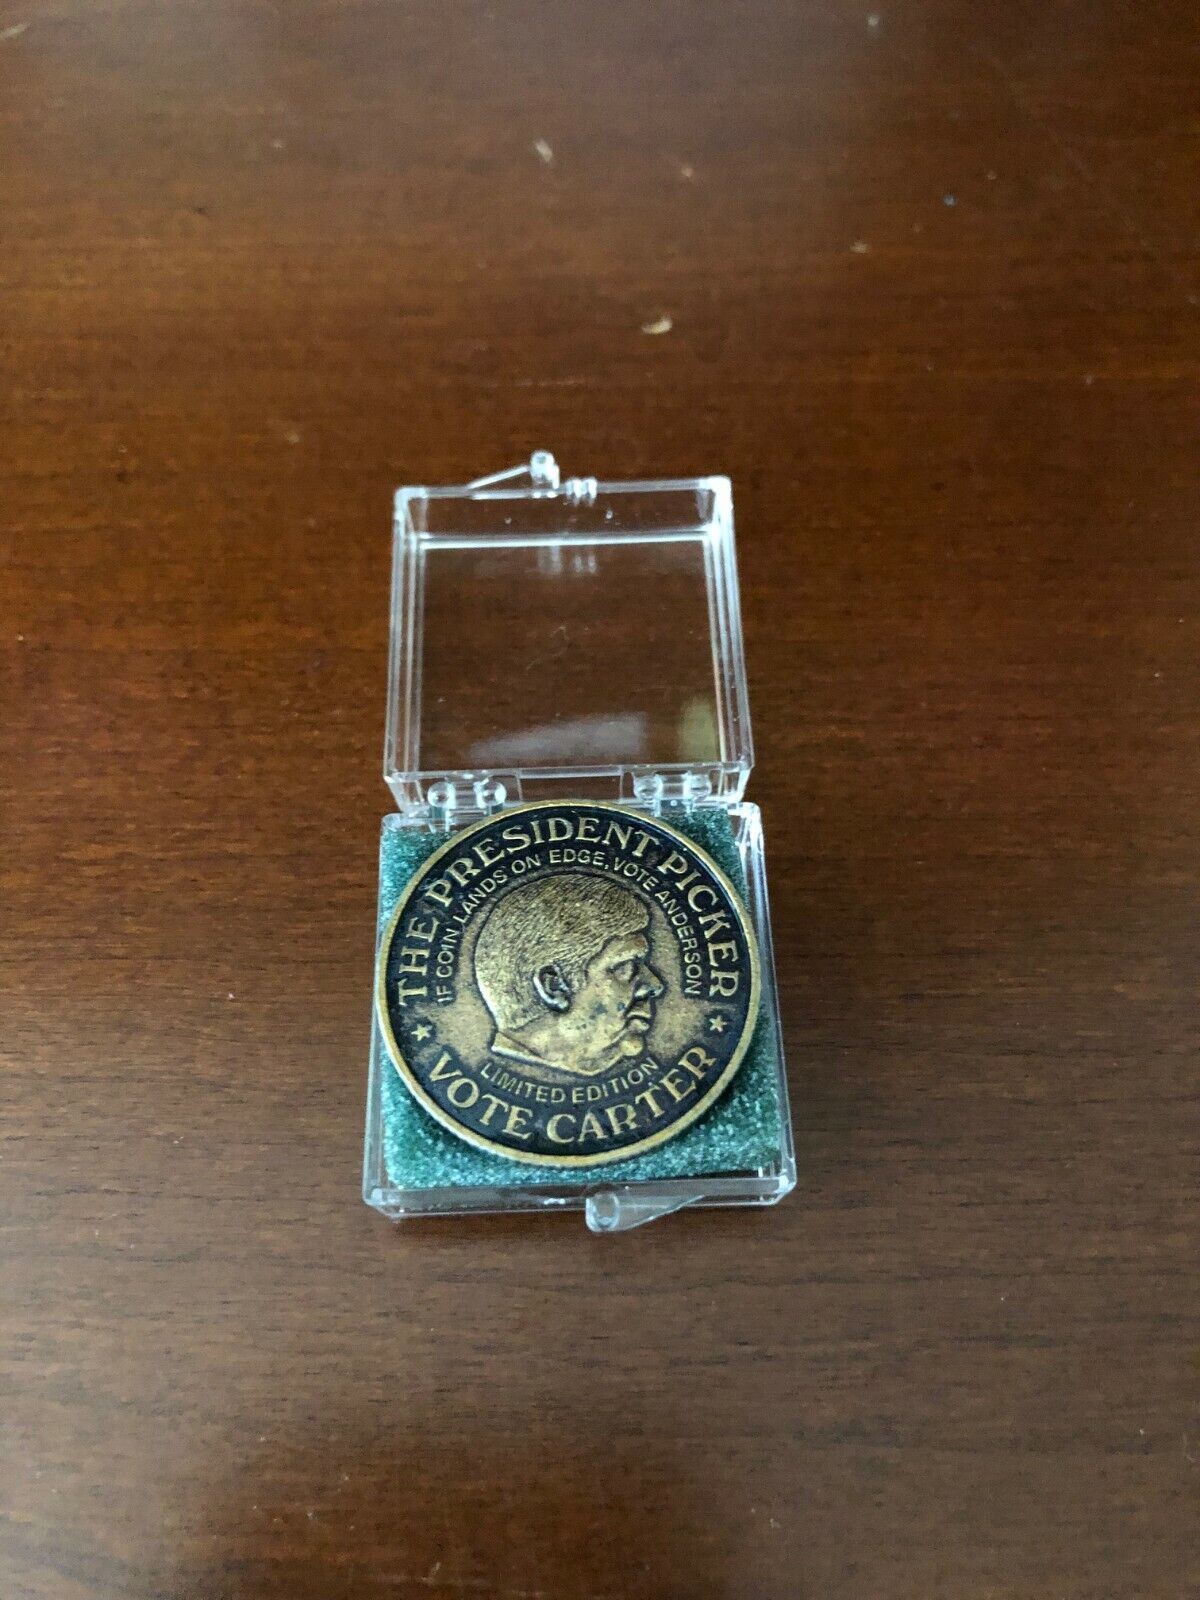 Vintage 1980 Vote REAGAN CARTER The President Picker Limited Edition Coin Token